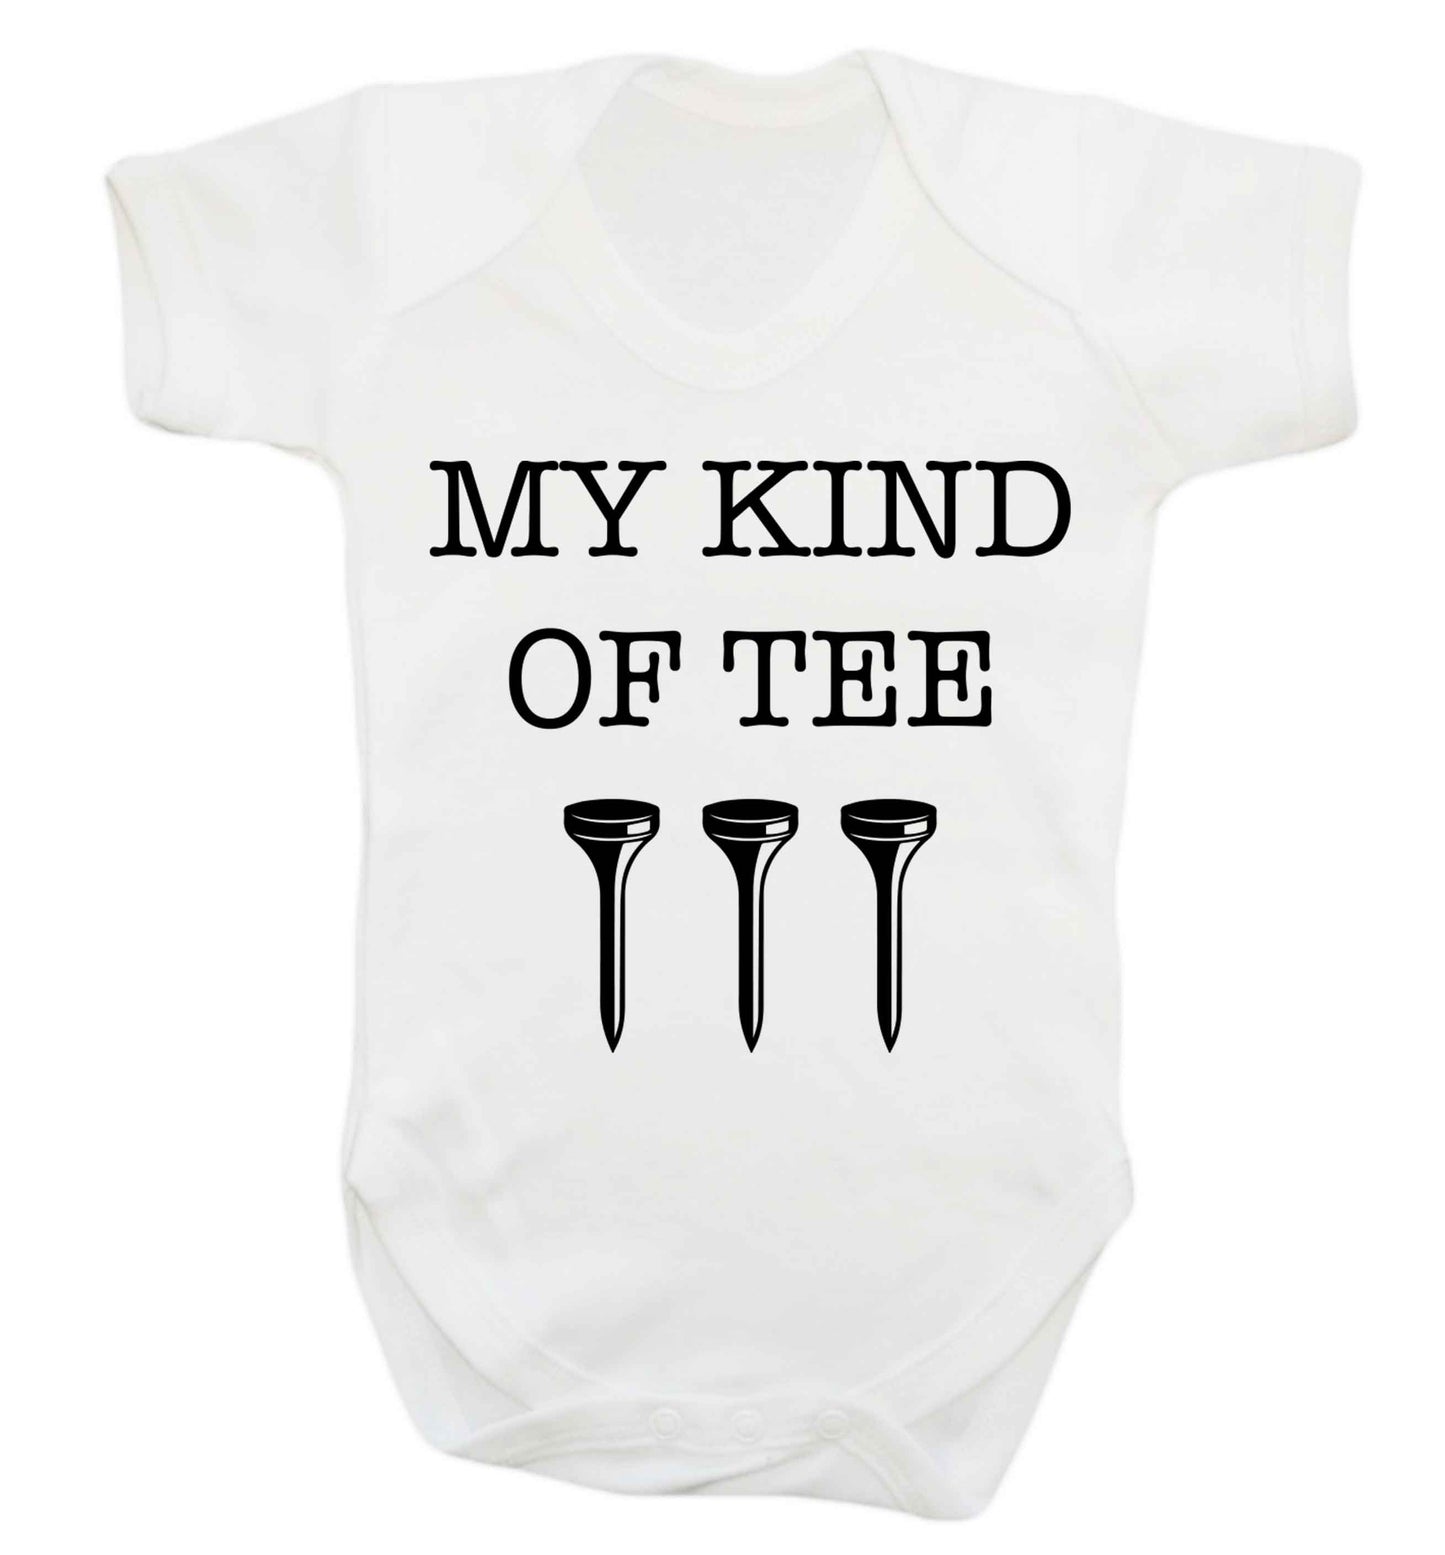 My kind of tee Baby Vest white 18-24 months